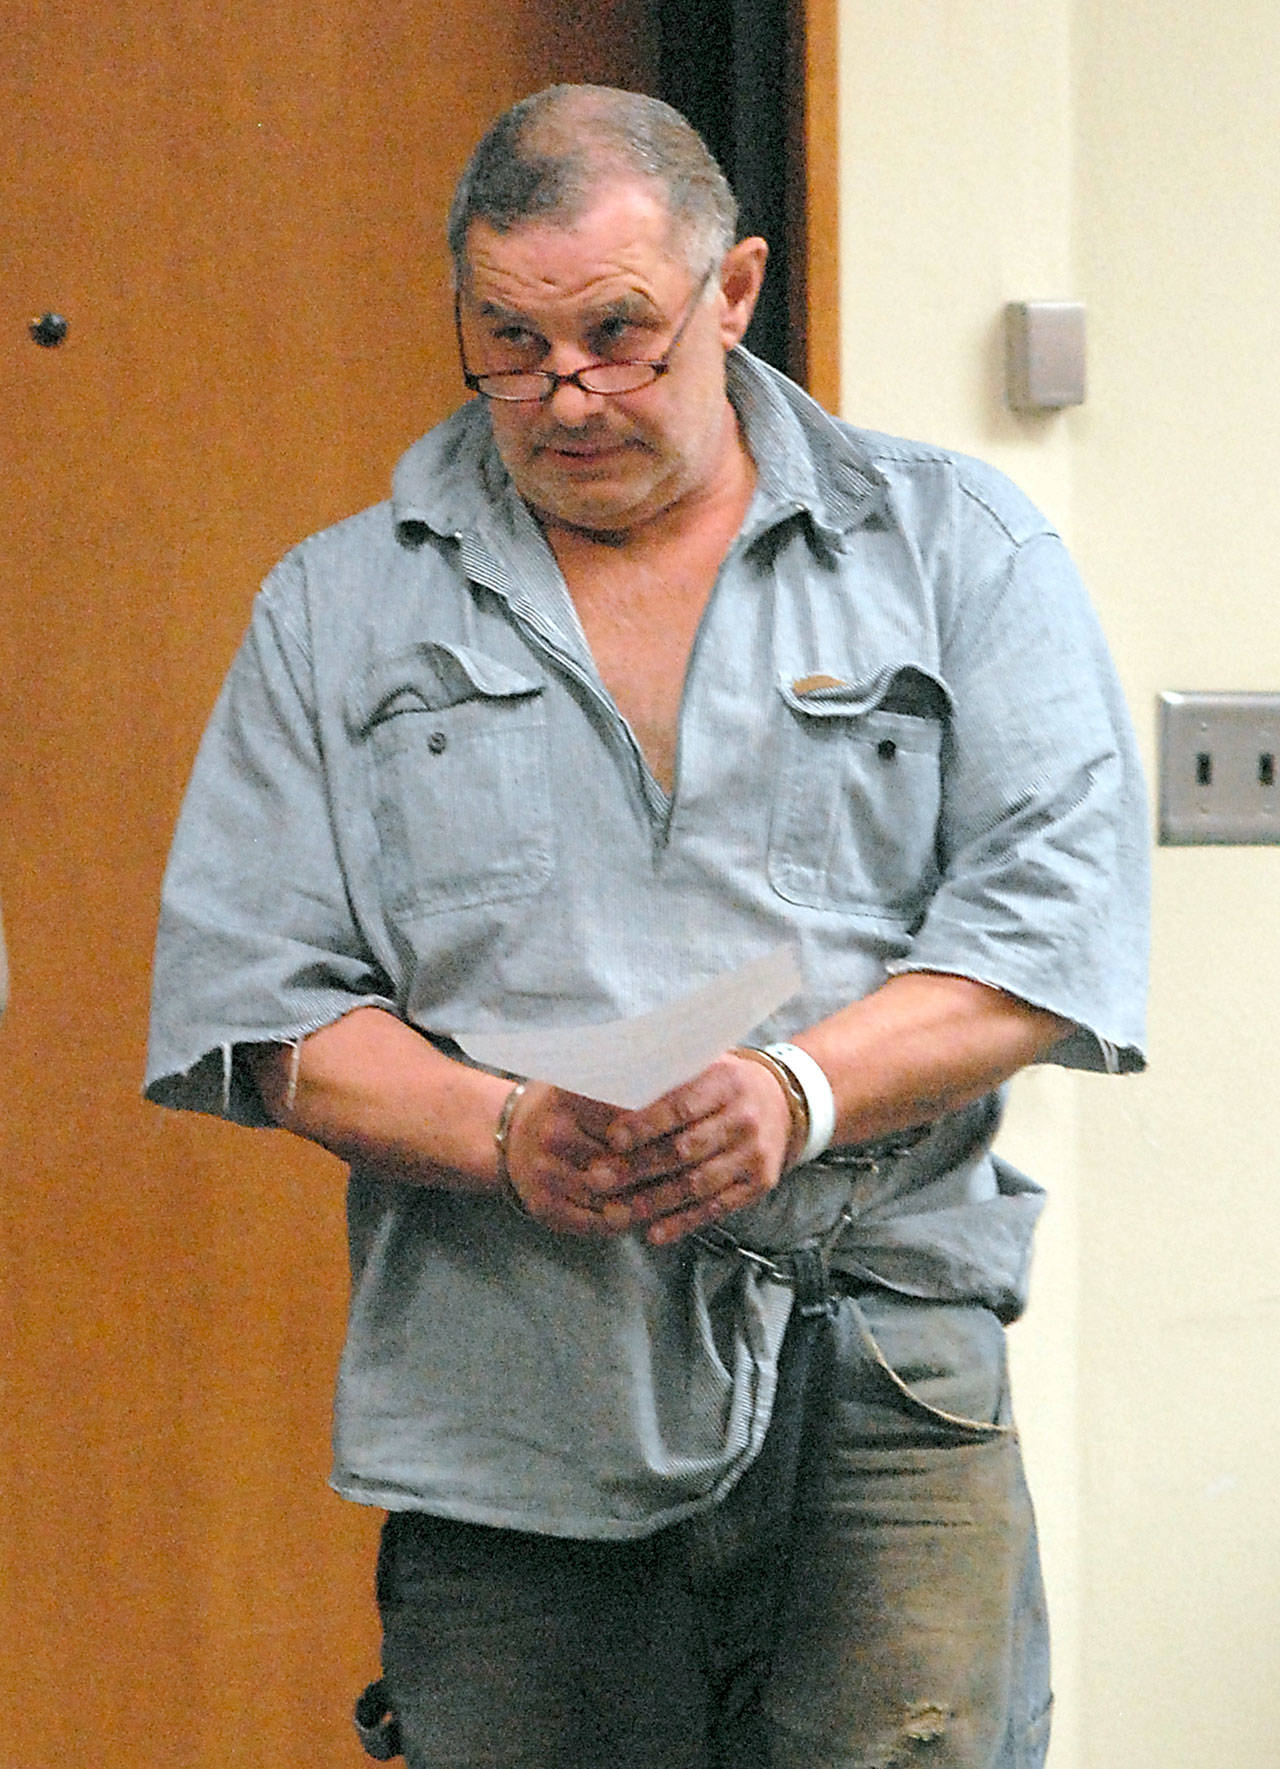 Roger Garman of Sequim enters Clallam County Superior Court in Port Angeles on Thursday in connection with alleged threats made to a Jamestown S’Klallam school bus driver and the tribal office. (Keith Thorpe/Peninsula Daily News)